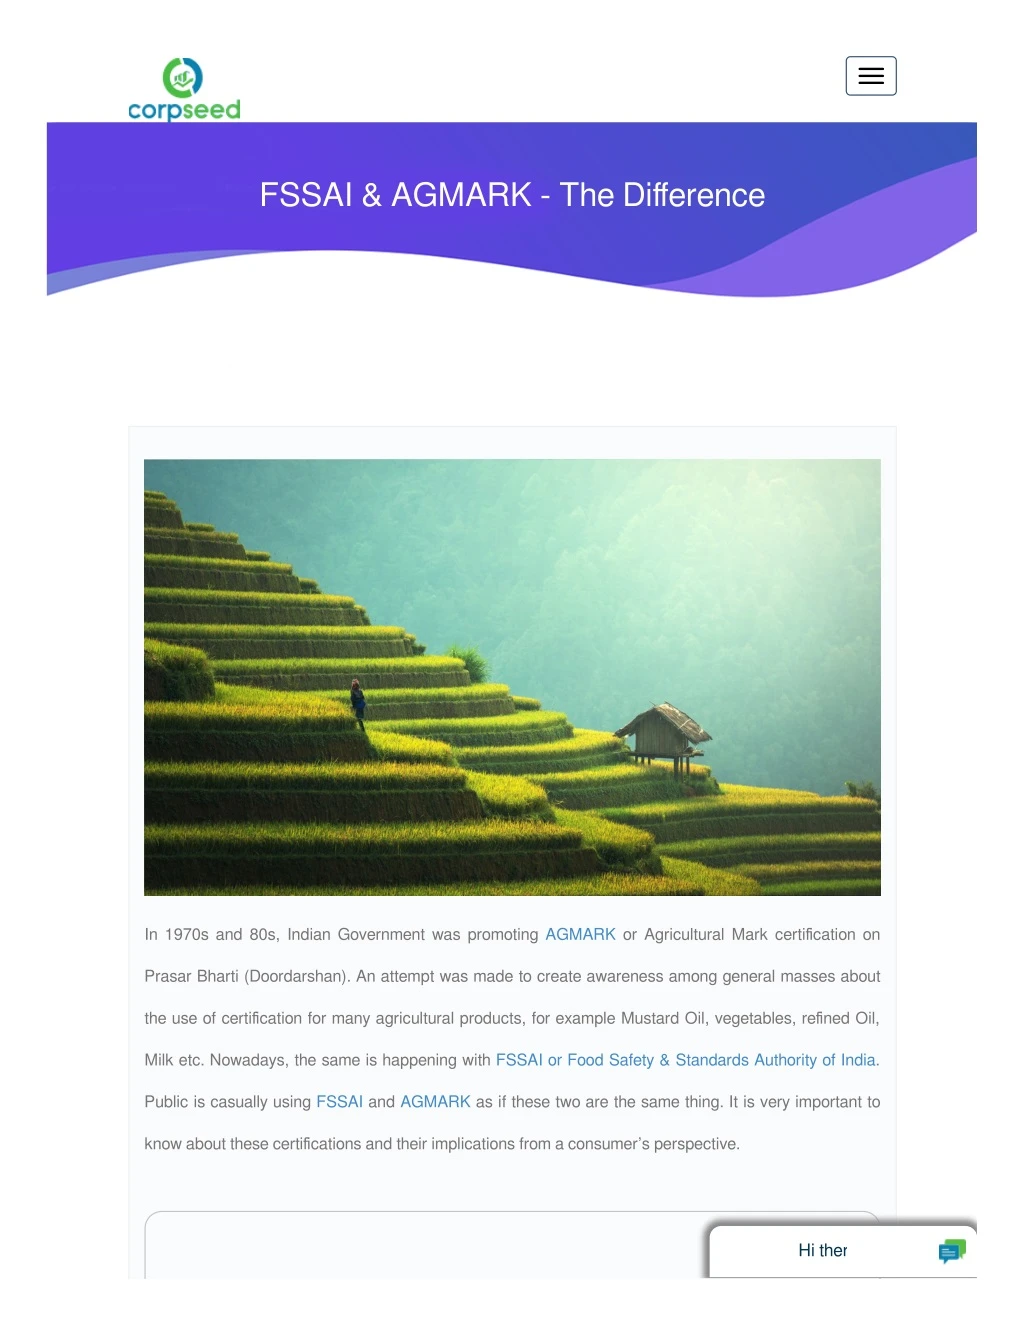 fssai agmark the difference